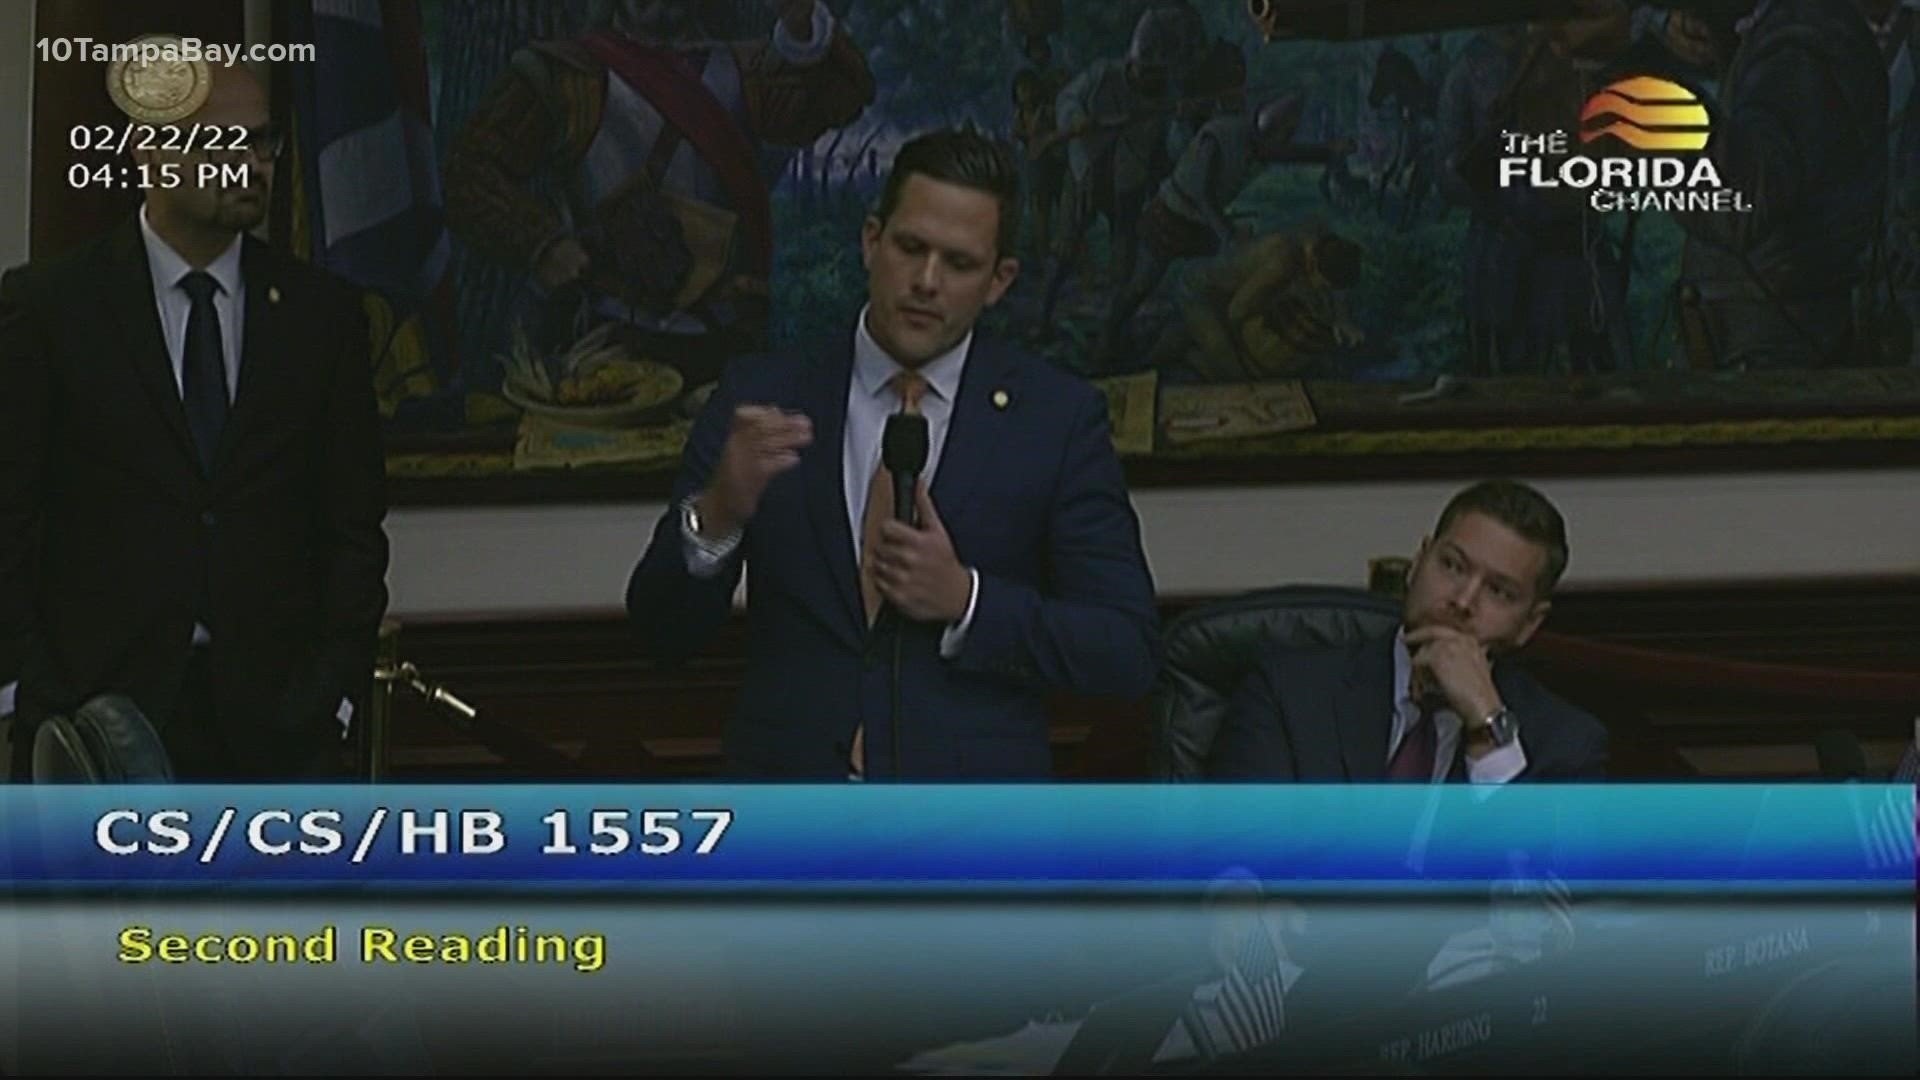 An amended version of the bill has been moved forward for a third reading in the Florida House.